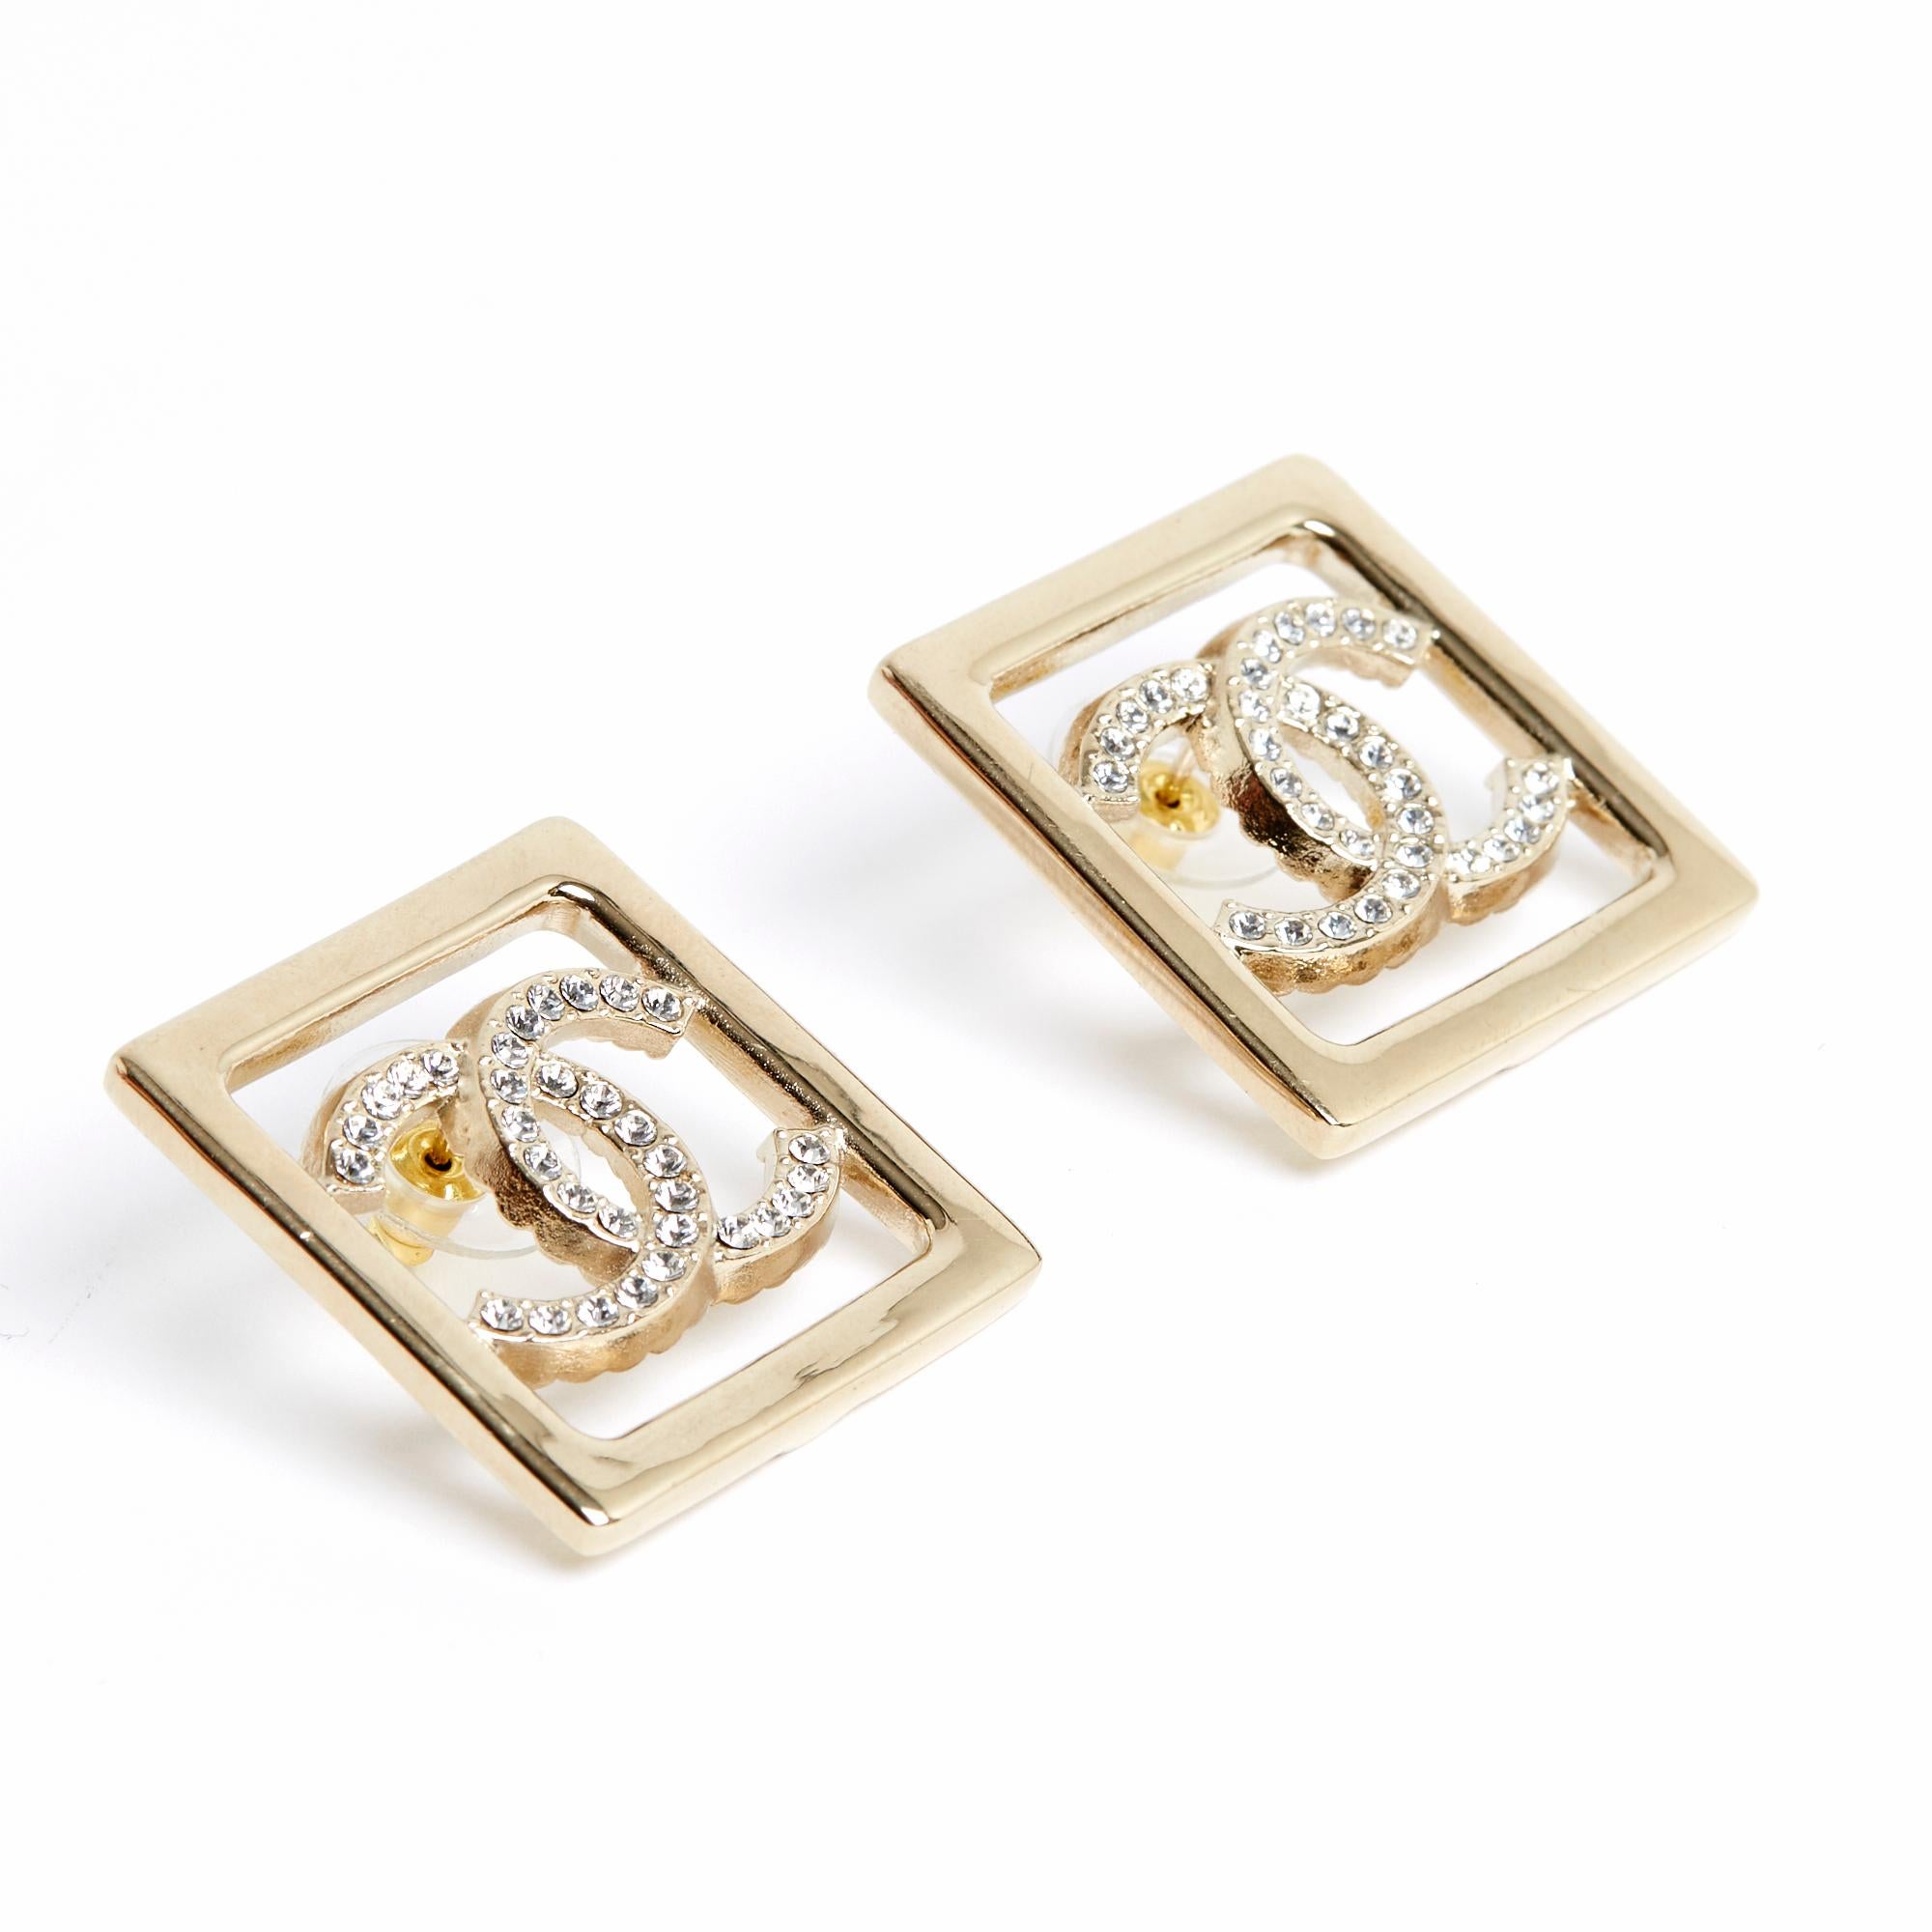 Chanel stud earrings in lightly gold-plated metal, with the motif of a square surrounding the CC symbol paved with small white rhinestones. Width 3.1 cm x height 3.1 cm. The earrings are delivered without invoice or original packaging but they are